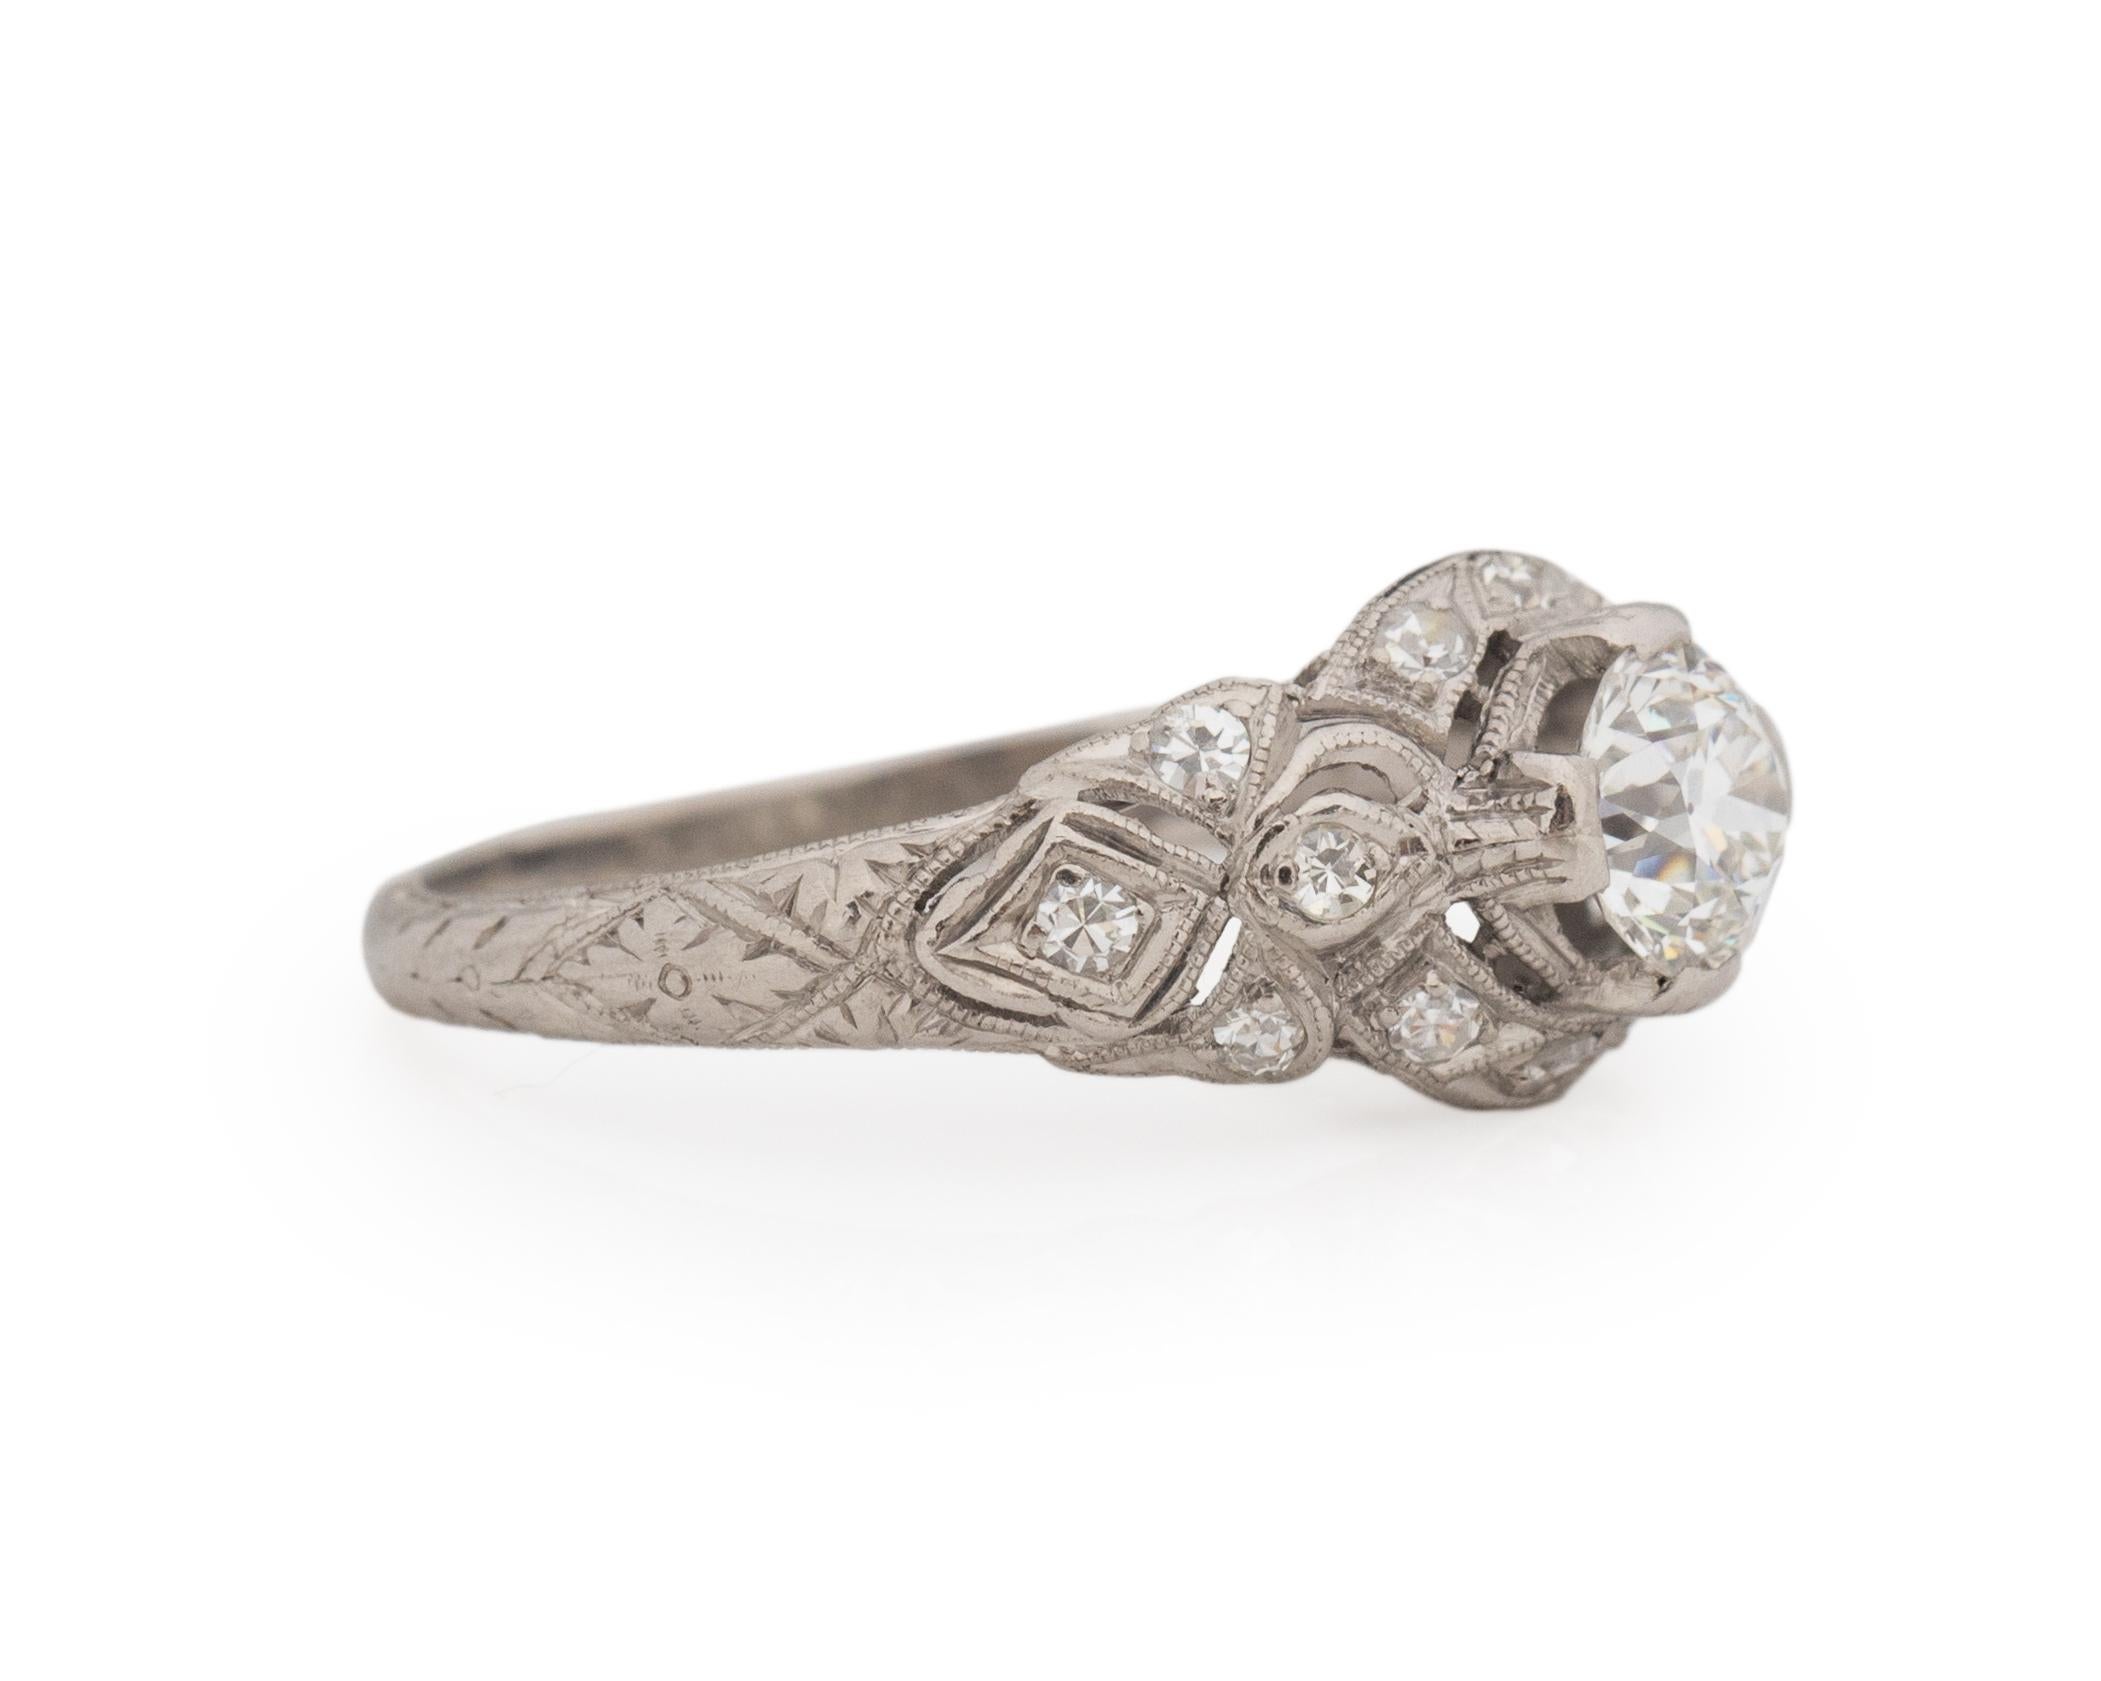 Ring Size: 4.75
Metal Type: Platinum [Hallmarked, and Tested]
Weight: 2.5 grams

Center Diamond Details:
Weight: .55ct
Cut: Old European brilliant
Color: H
Clarity: VS

Side Stone Details:
Weight: .15ct, total weight
Cut: Antique European Cut
Color: